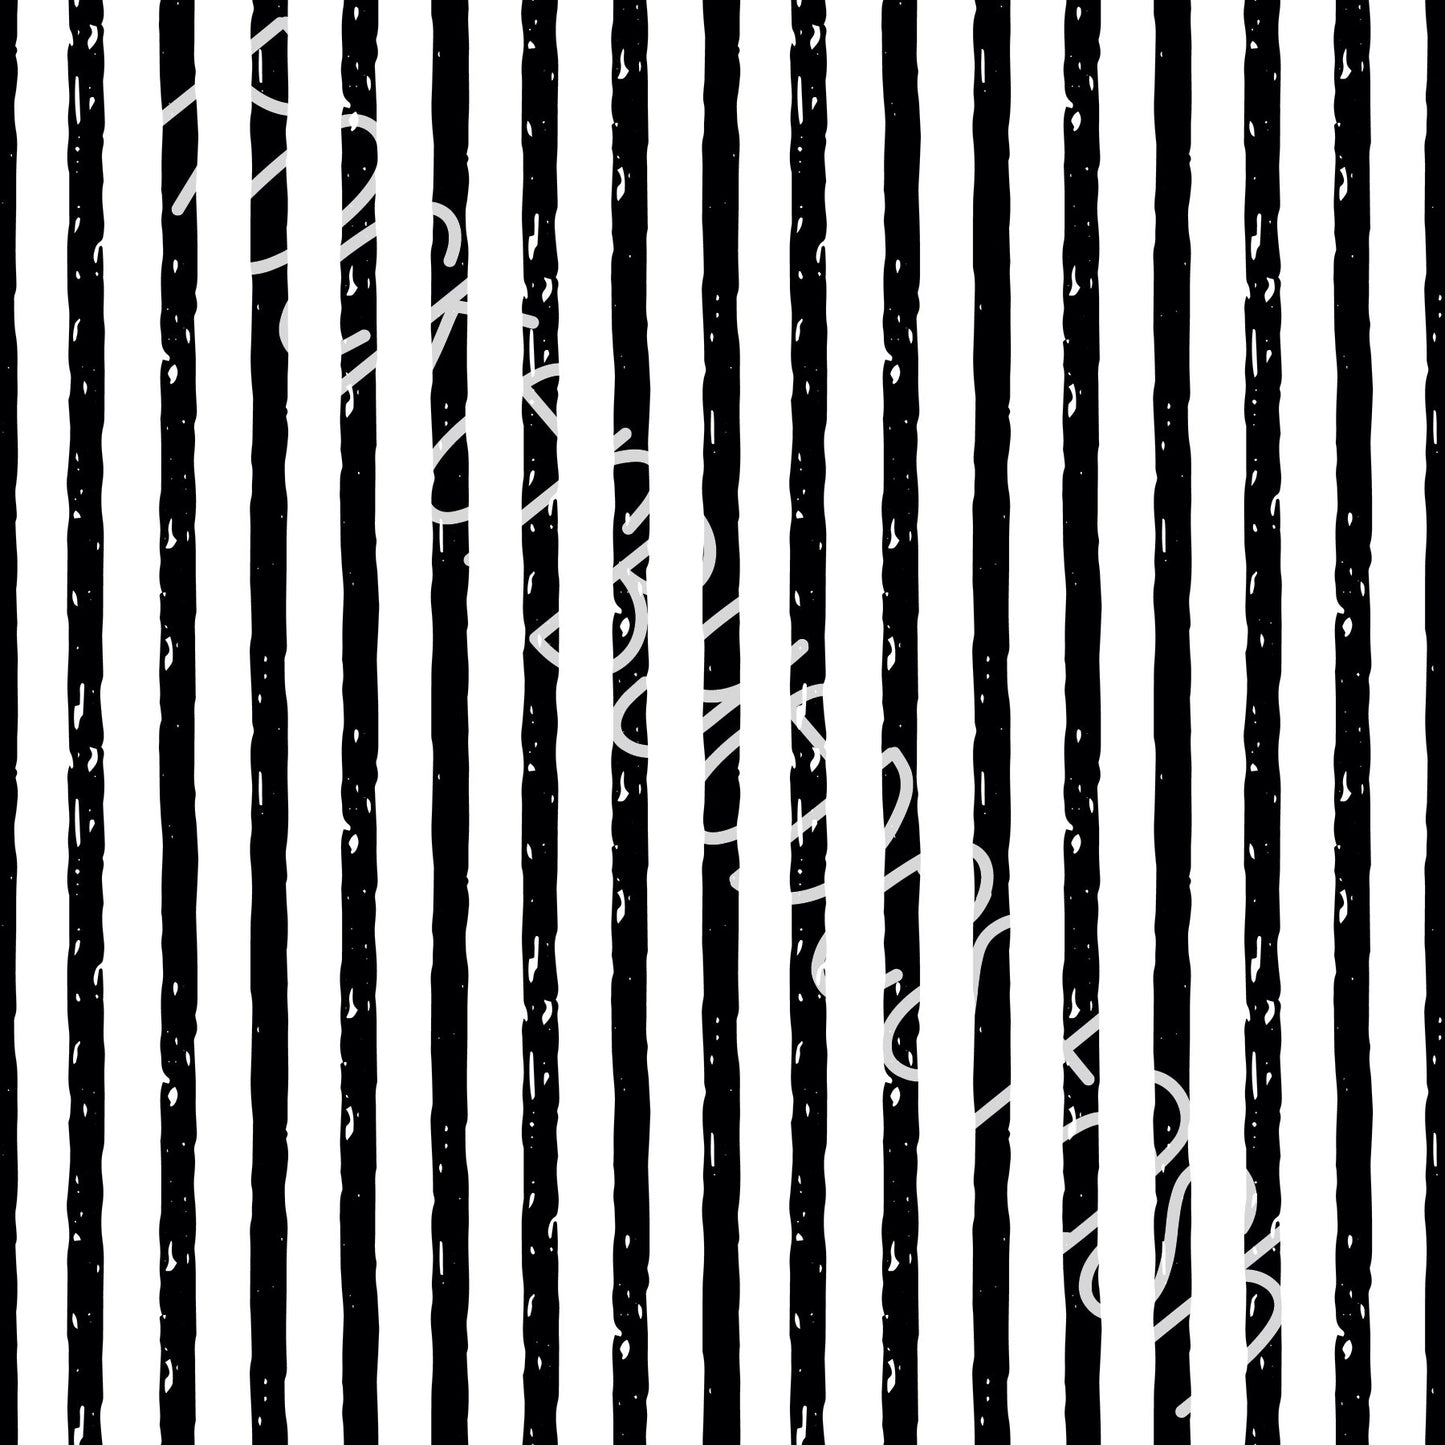 RETAIL Bamboo Lycra ACCENT print - 1 yard per quantity Coordinate designs bamboo lycra Black and white